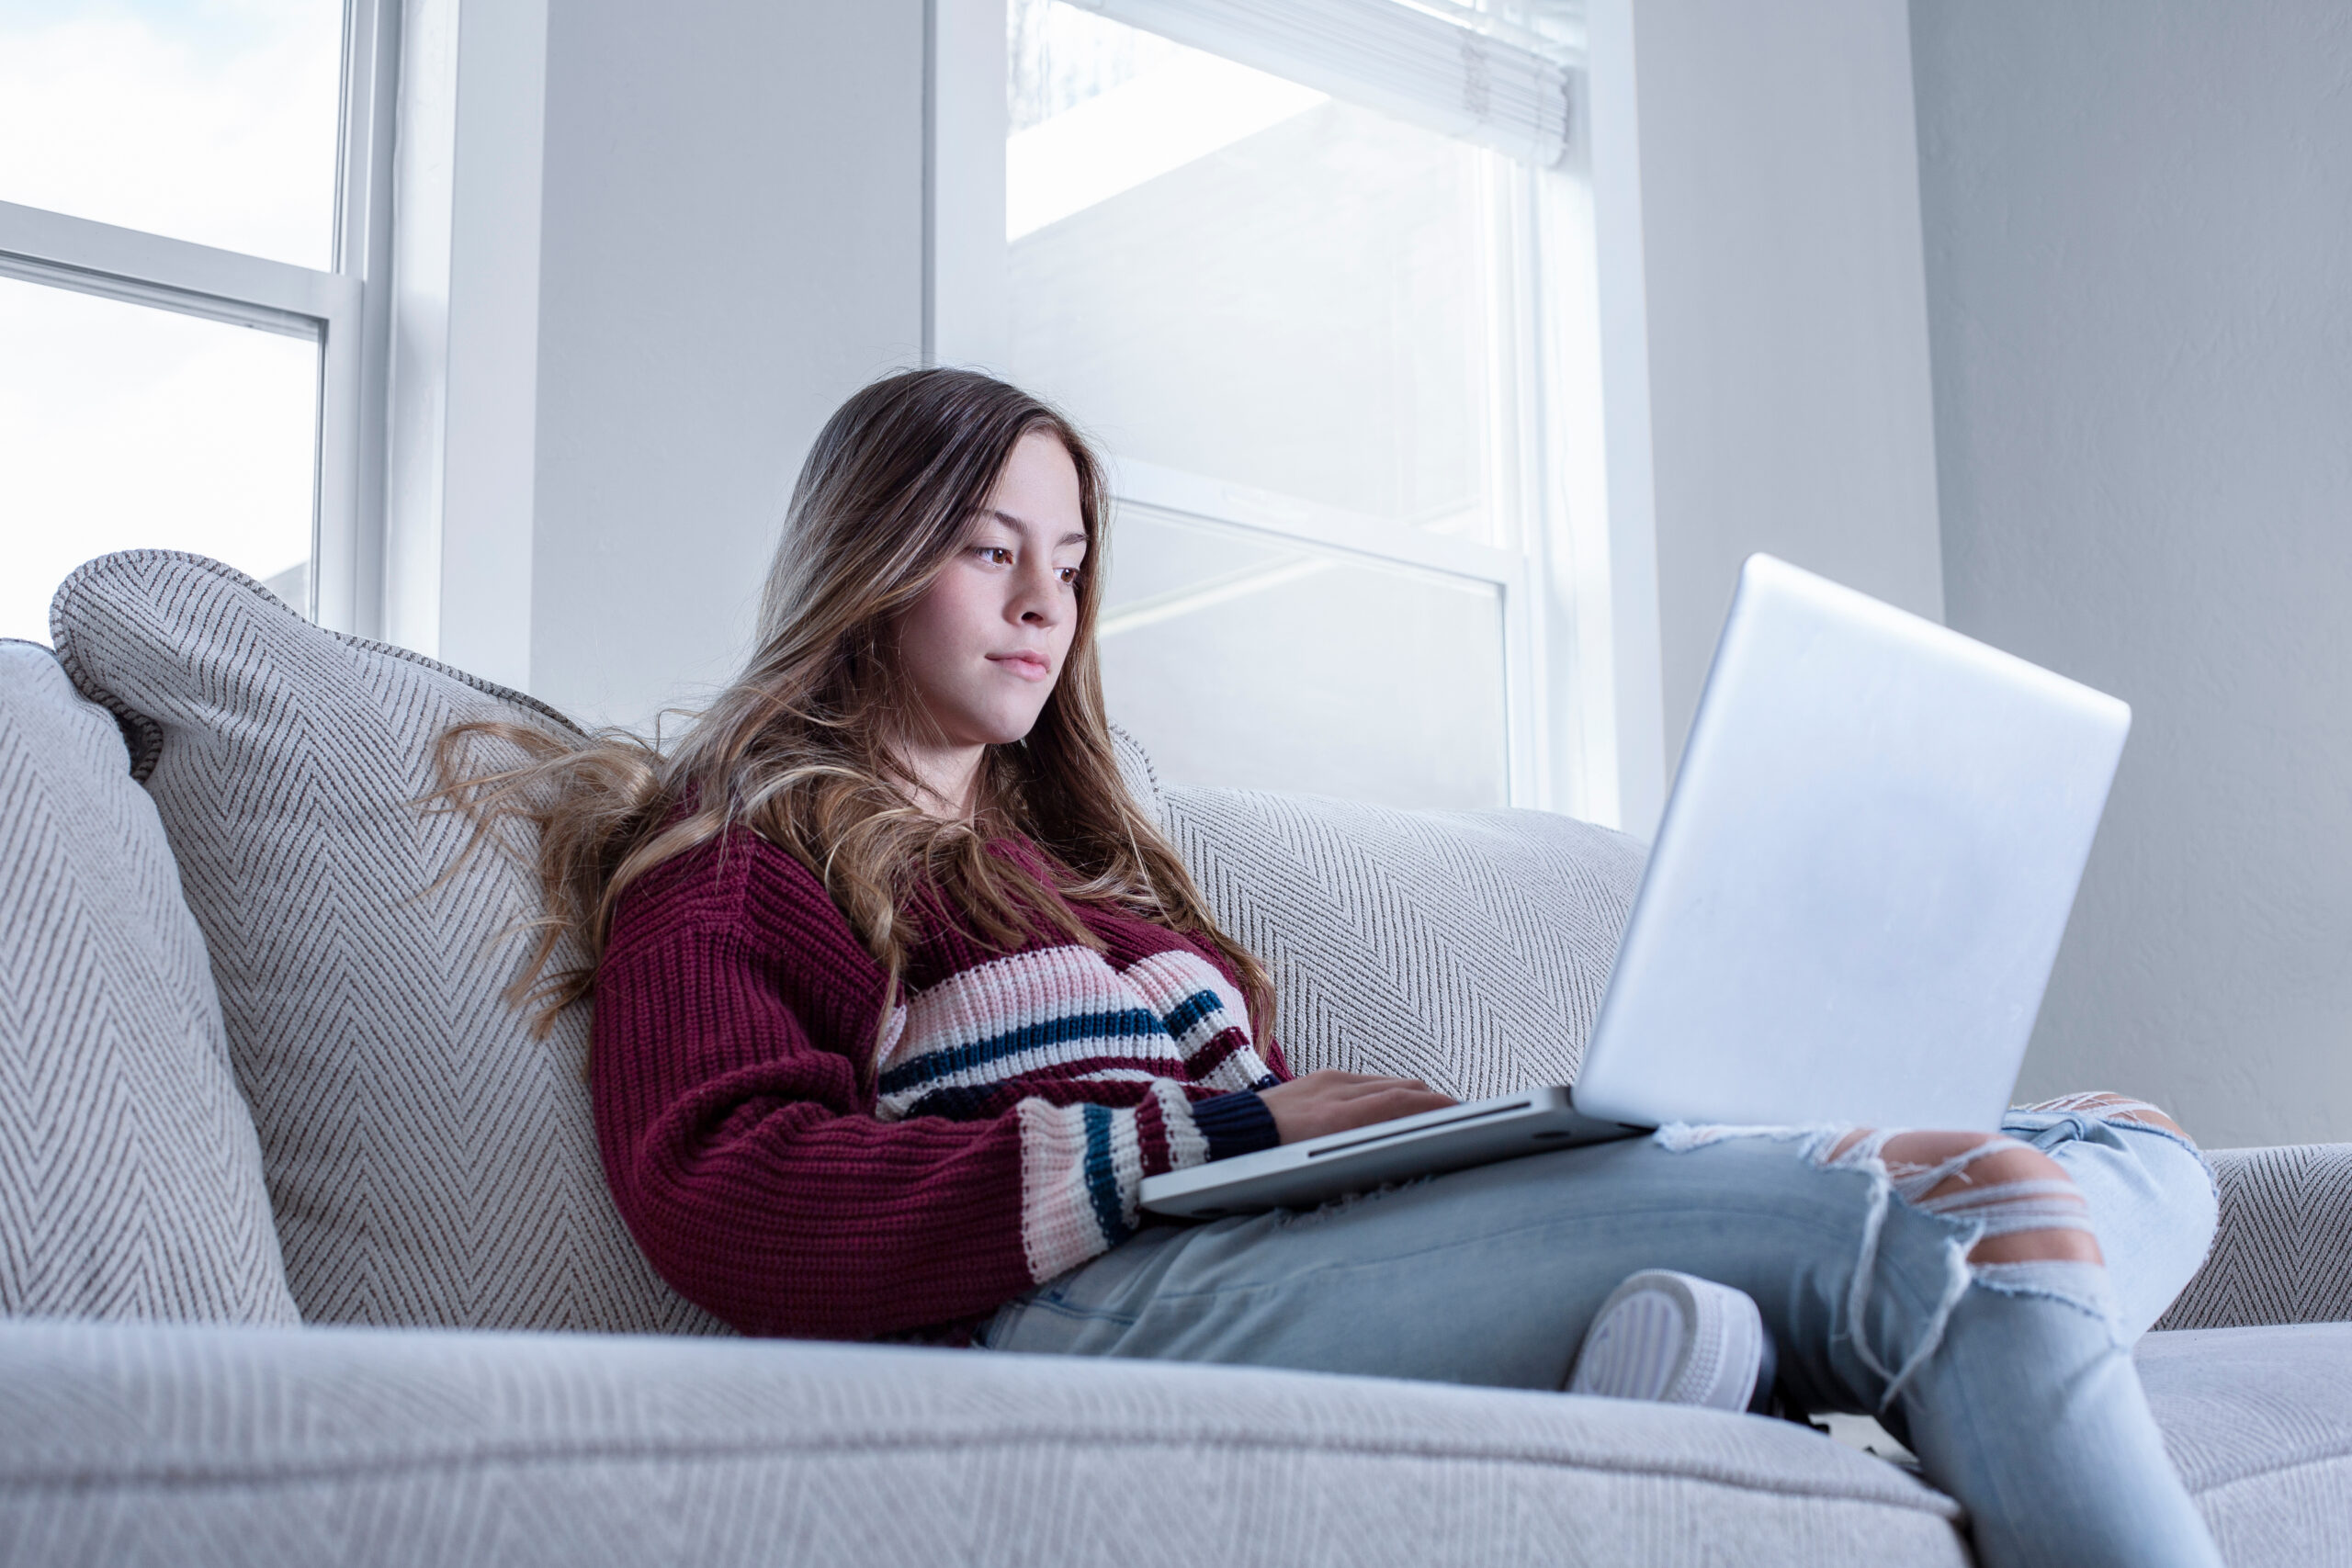 Teen female student studying on the couch doing school work from